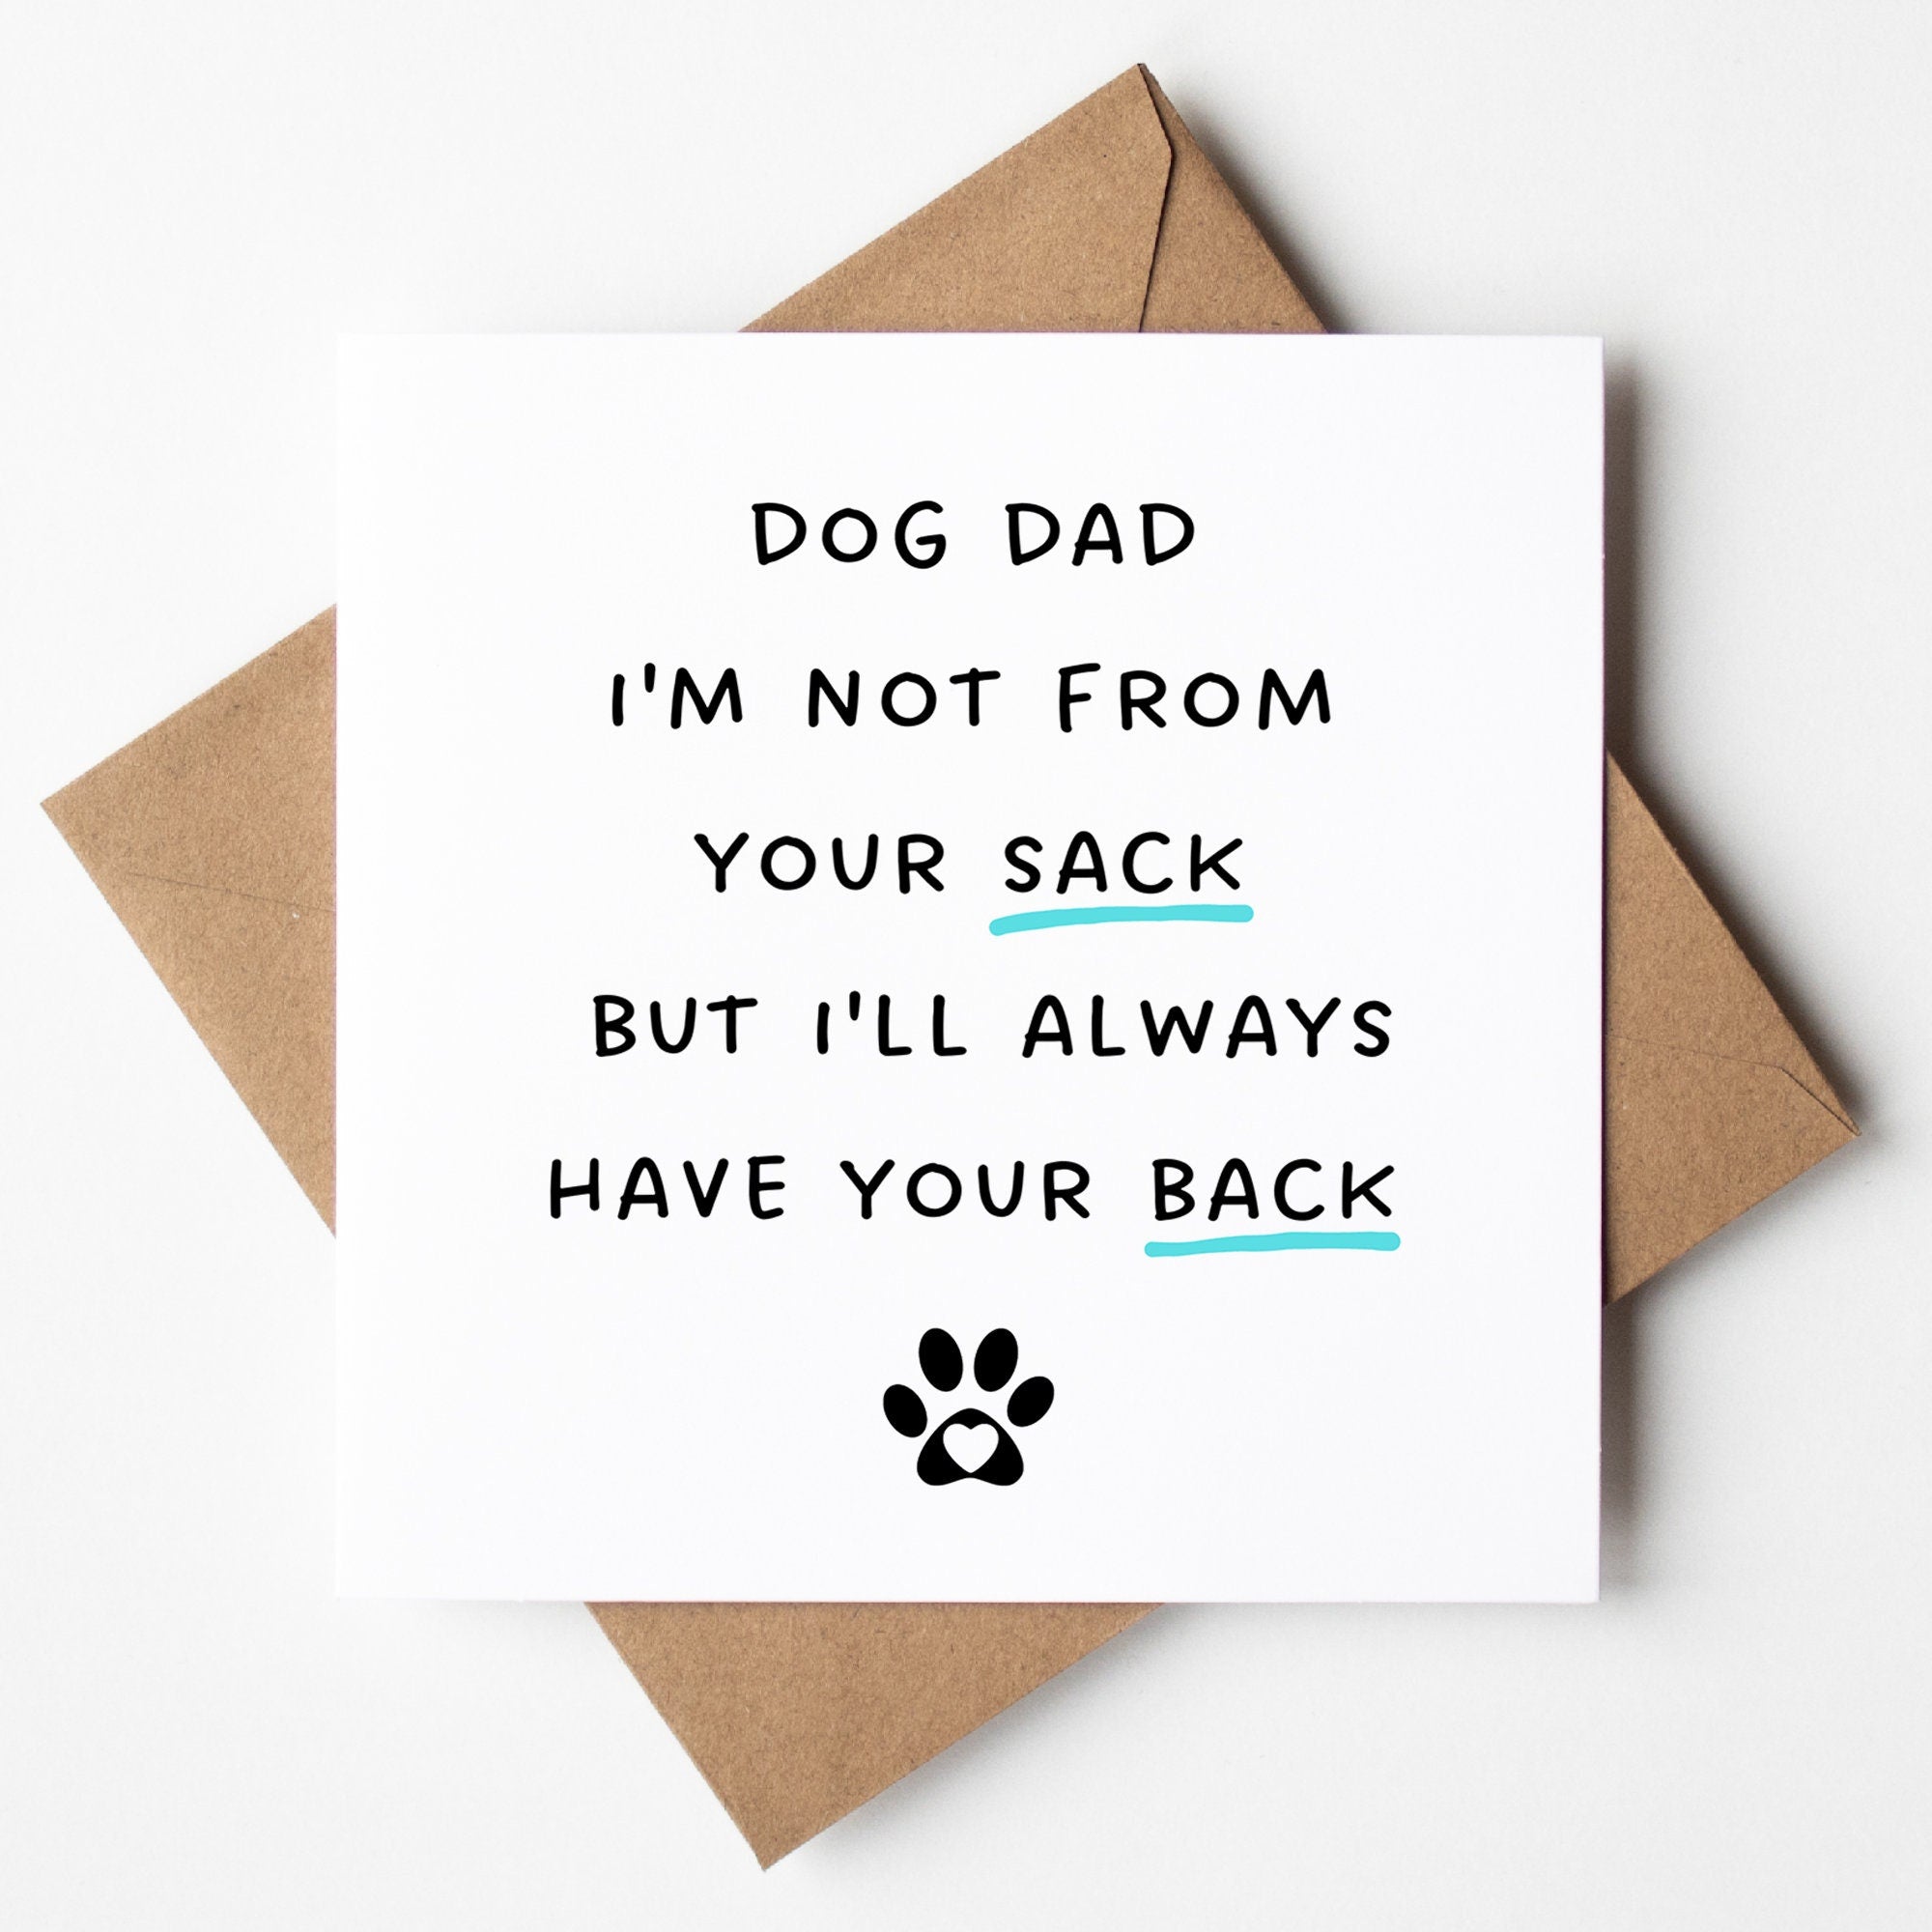 Fathers Day Card From The Dog - Even Though I'm Not From Your Sack